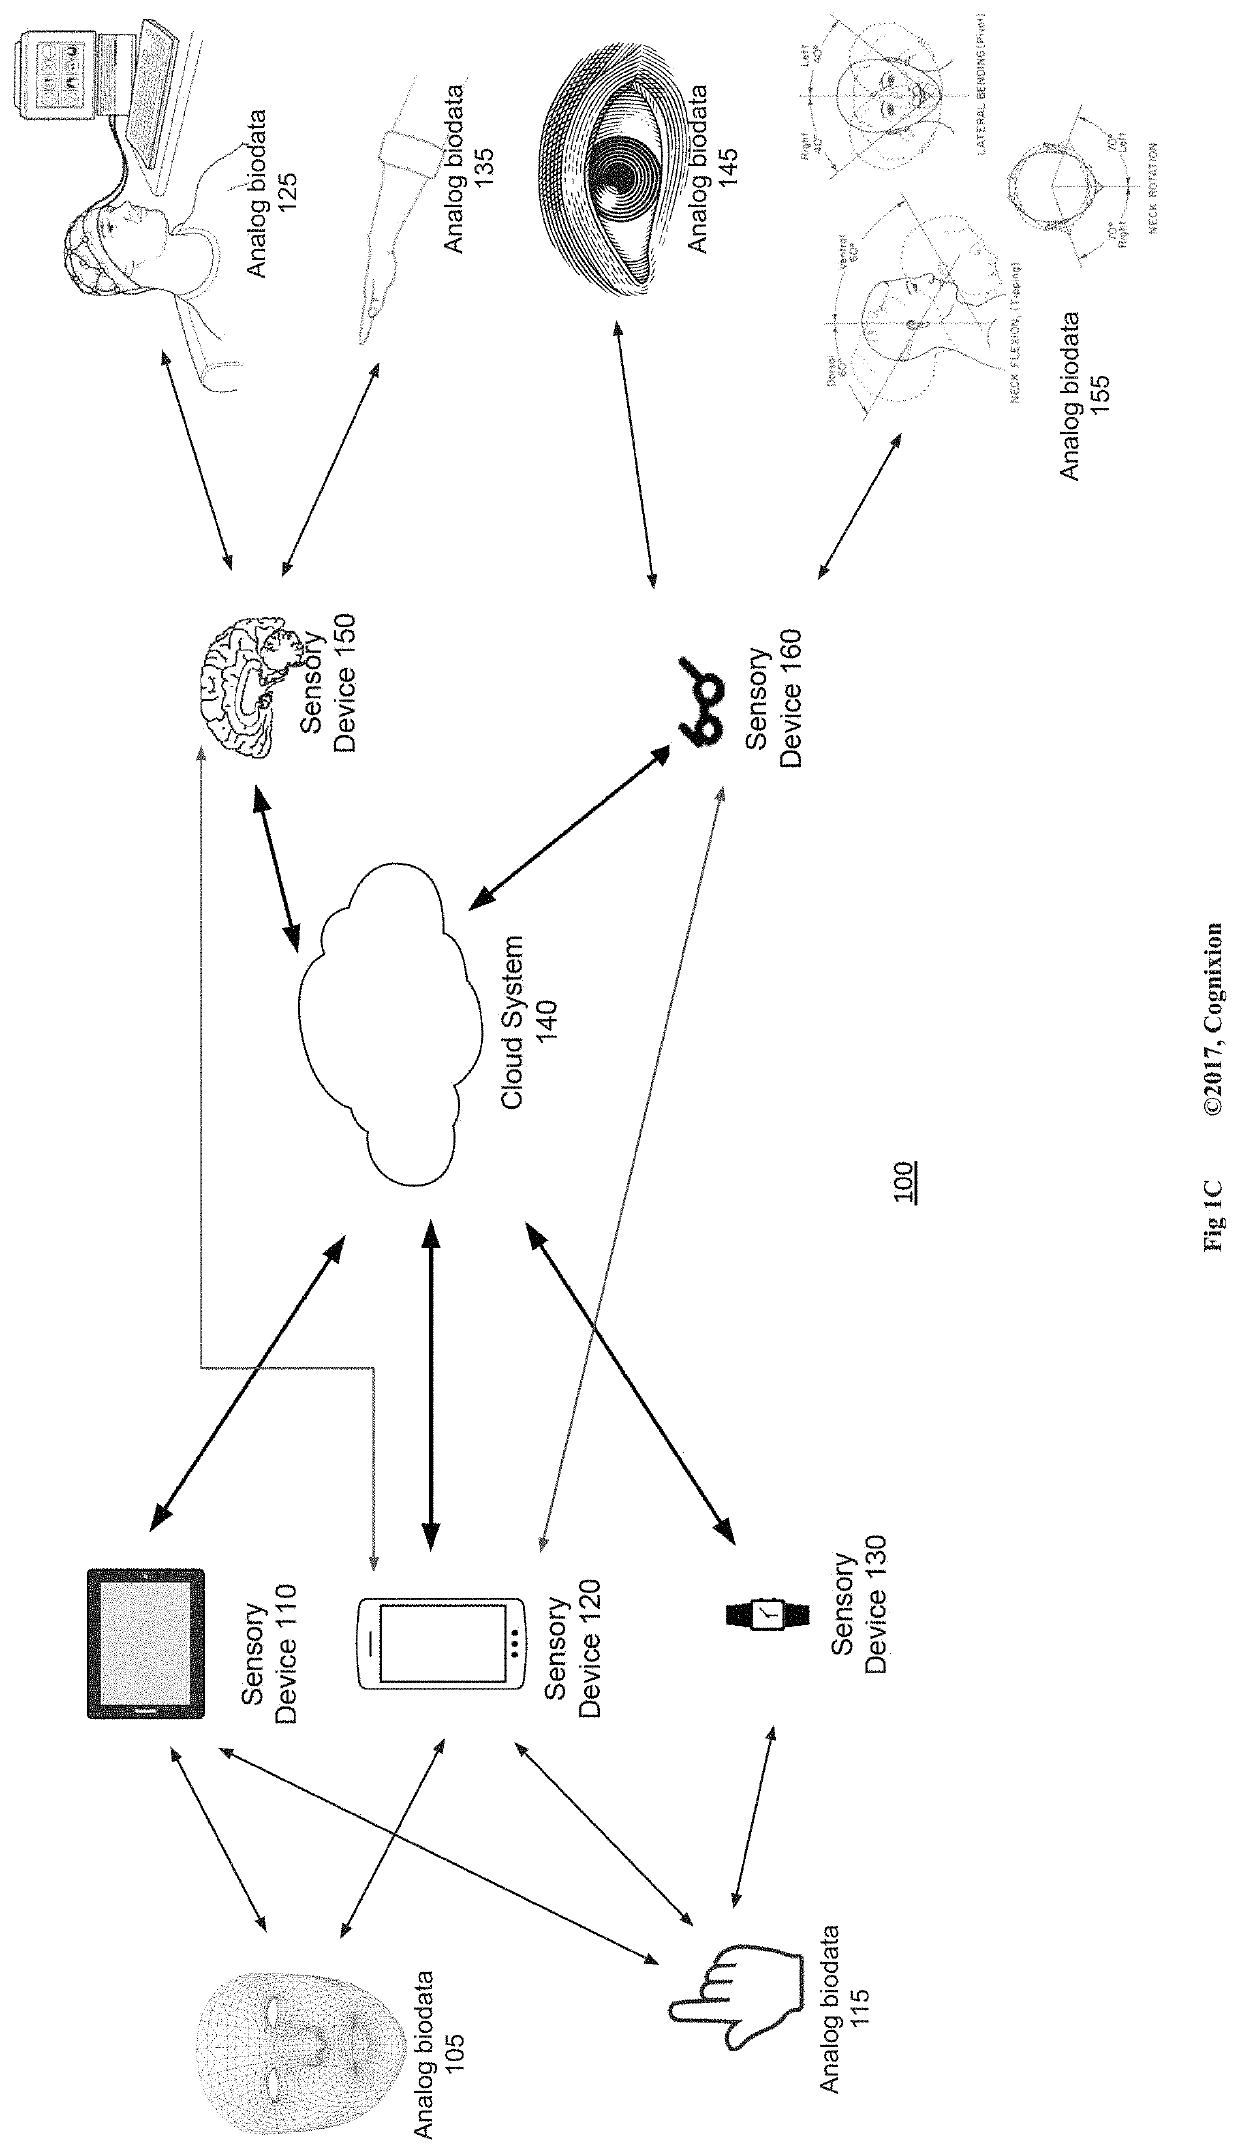 Nonverbal multi-input and feedback devices for user intended computer control and communication of text, graphics and audio